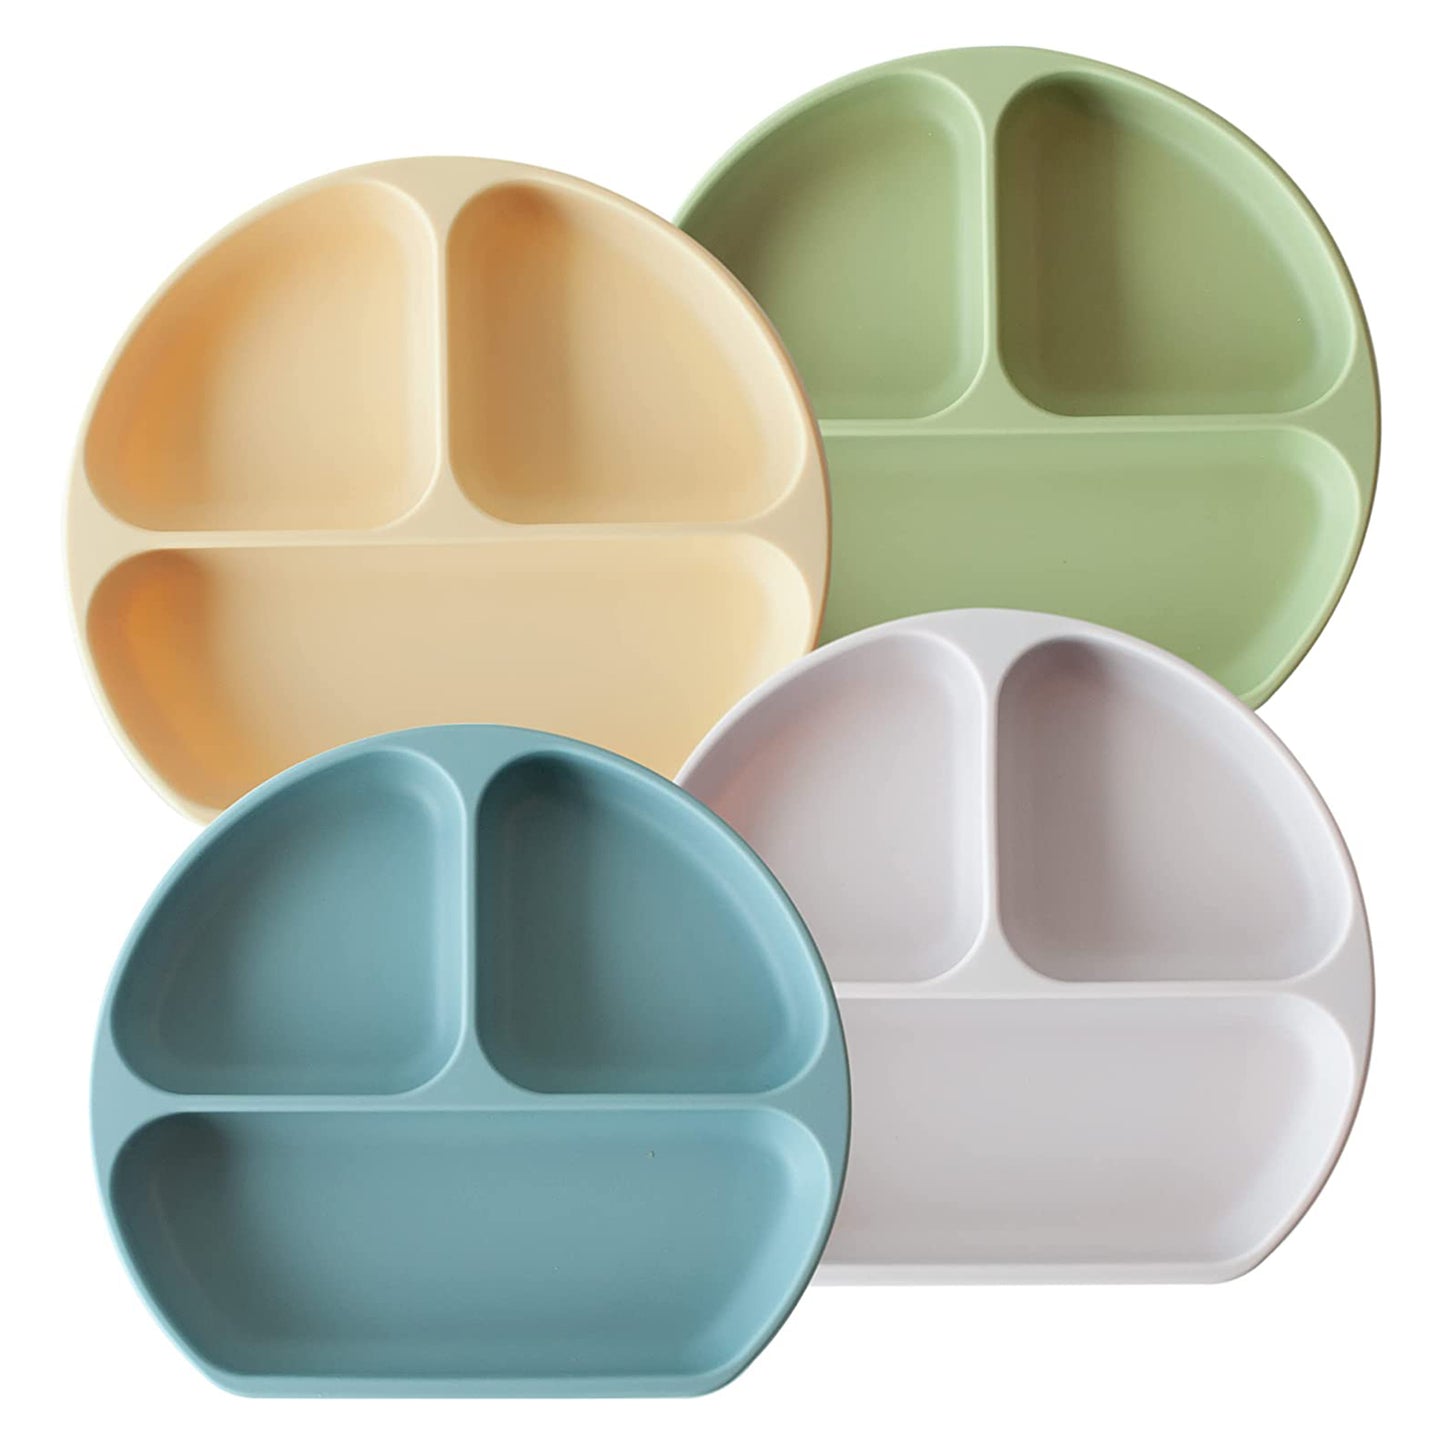 Suction Plates - Set of 4 - Neutral